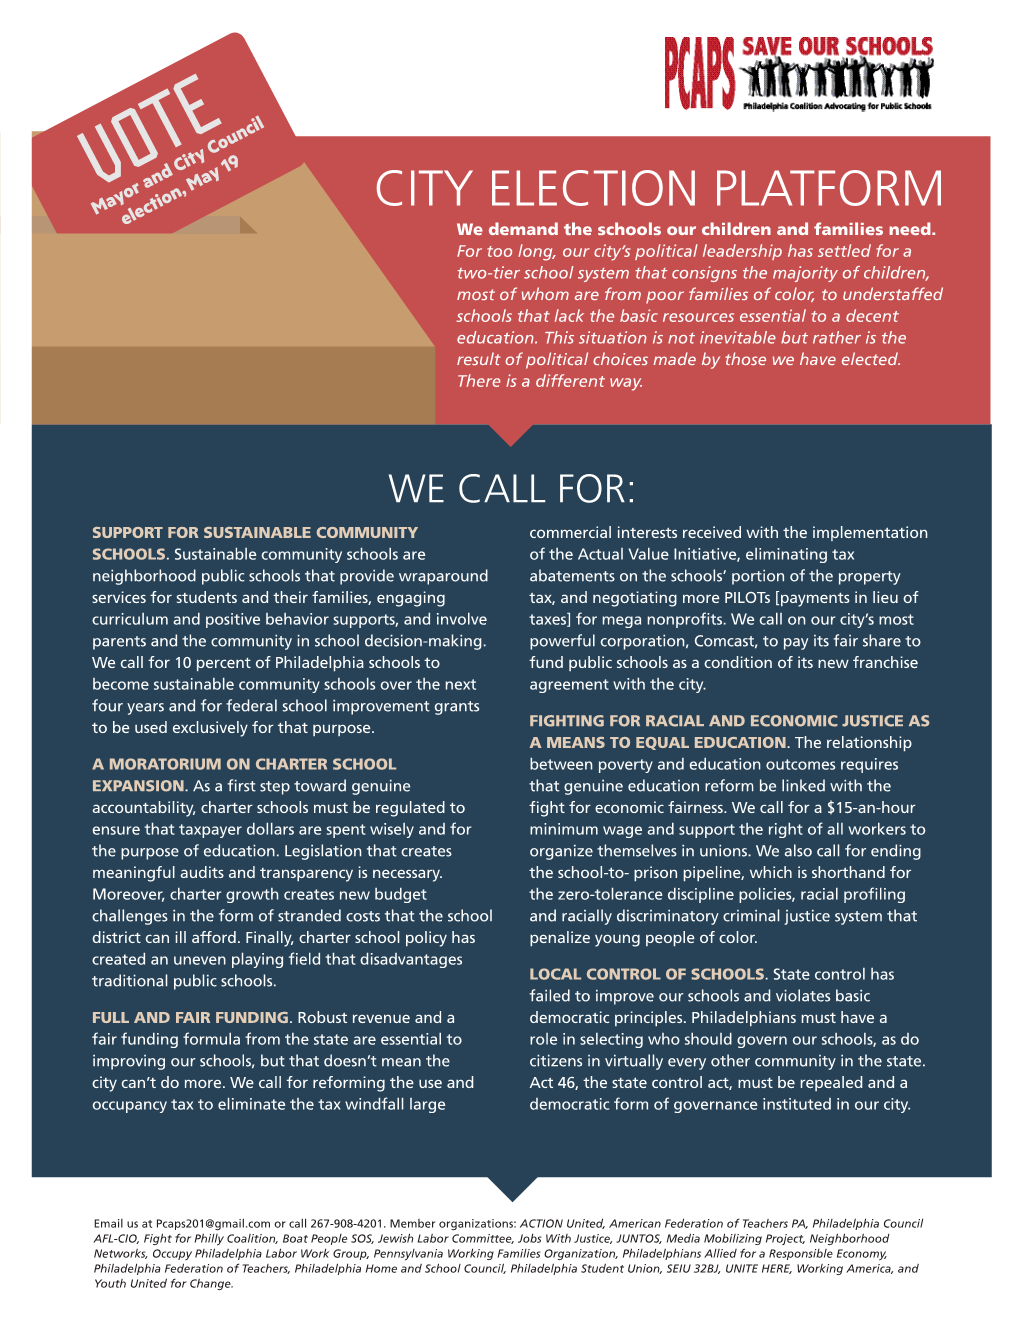 CITY ELECTION PLATFORM Election, May 19 We Demand the Schools Our Children and Families Need